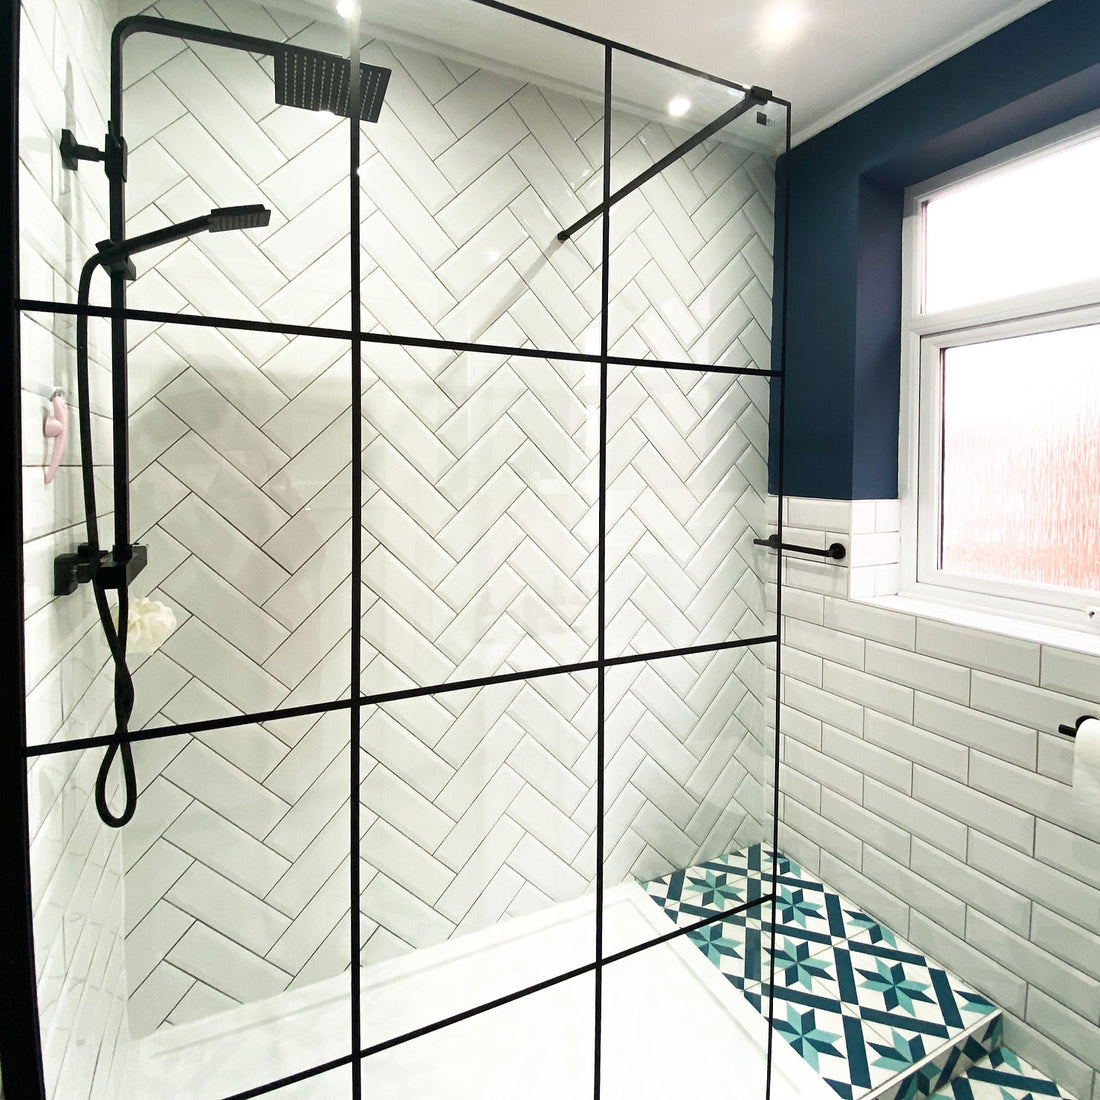 Five Things I Learnt Renovating a Bathroom the Week Before Christmas